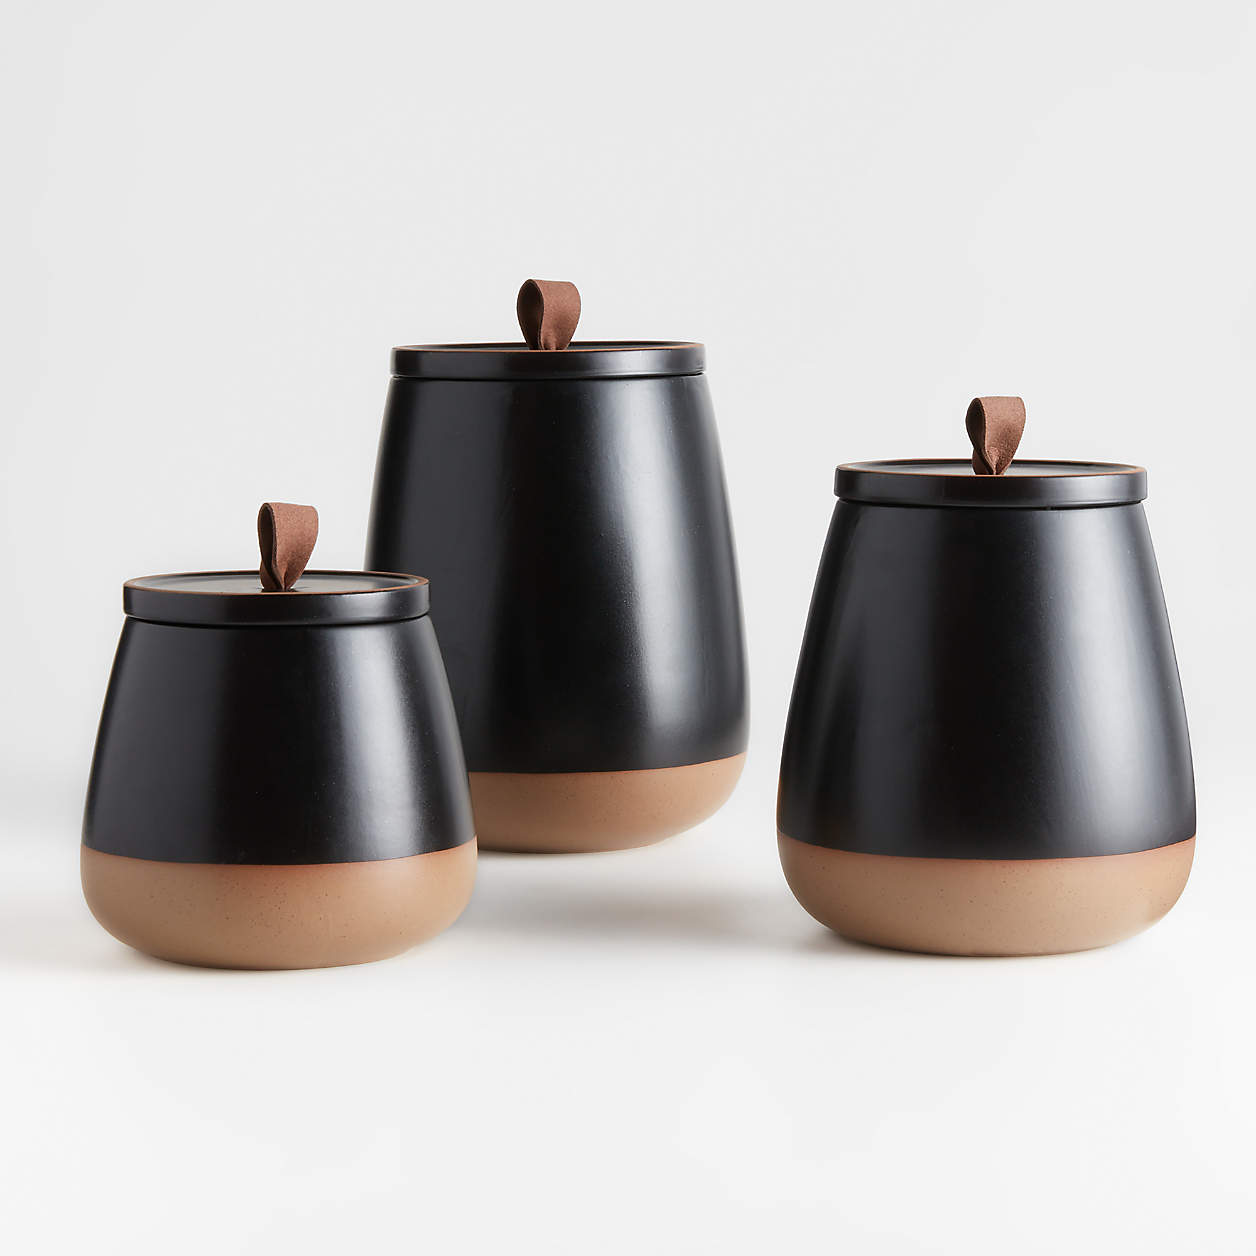 Thero Ceramic Canisters 